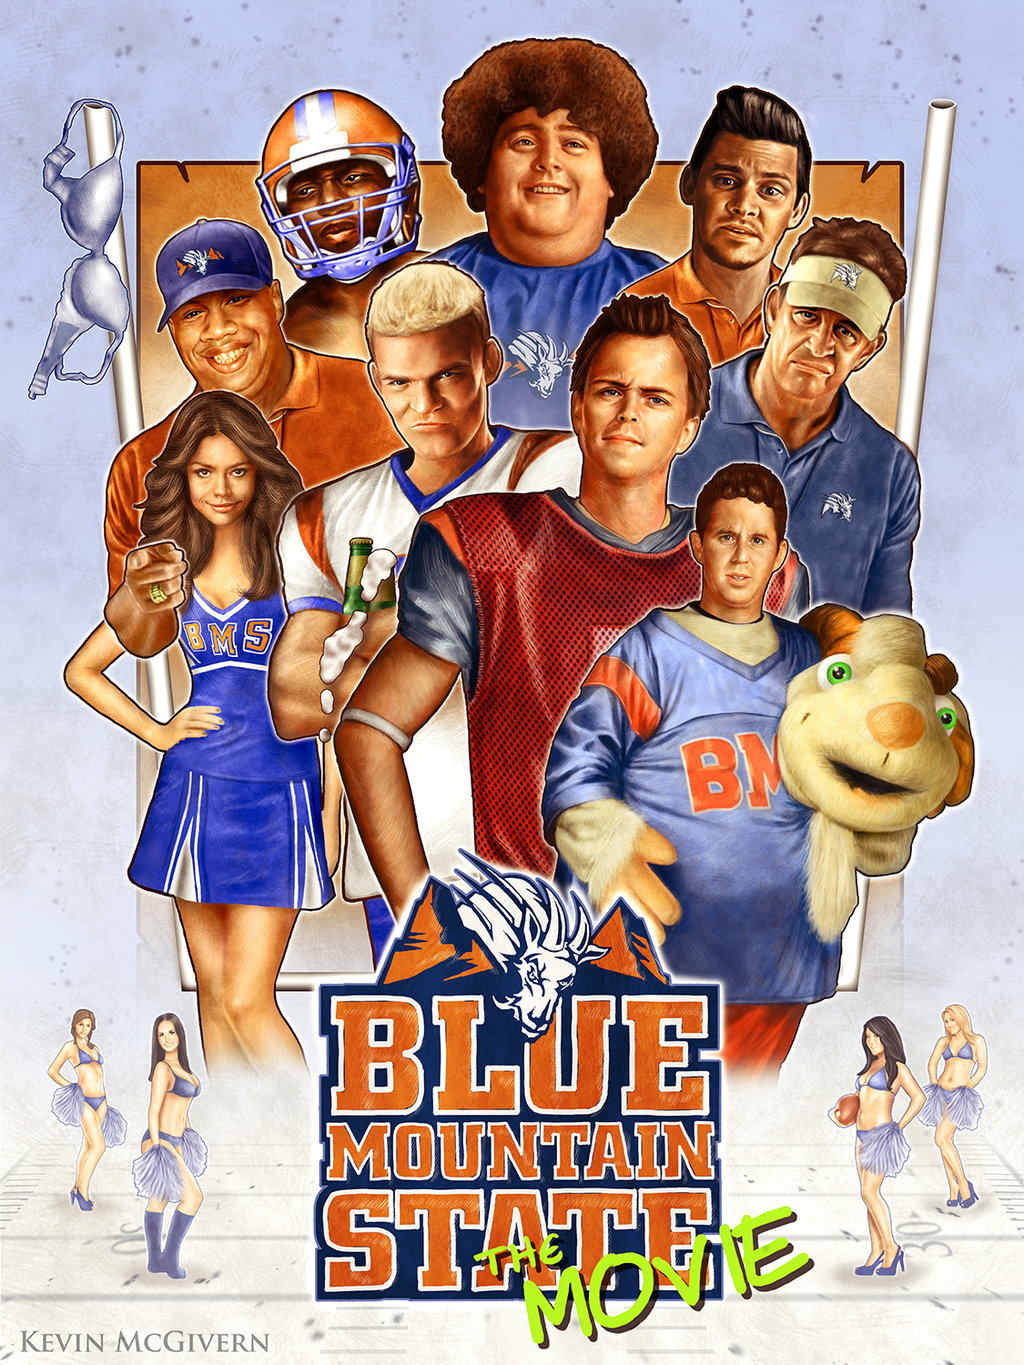 Blue Mountain State movie poster by kevmcgivernart on